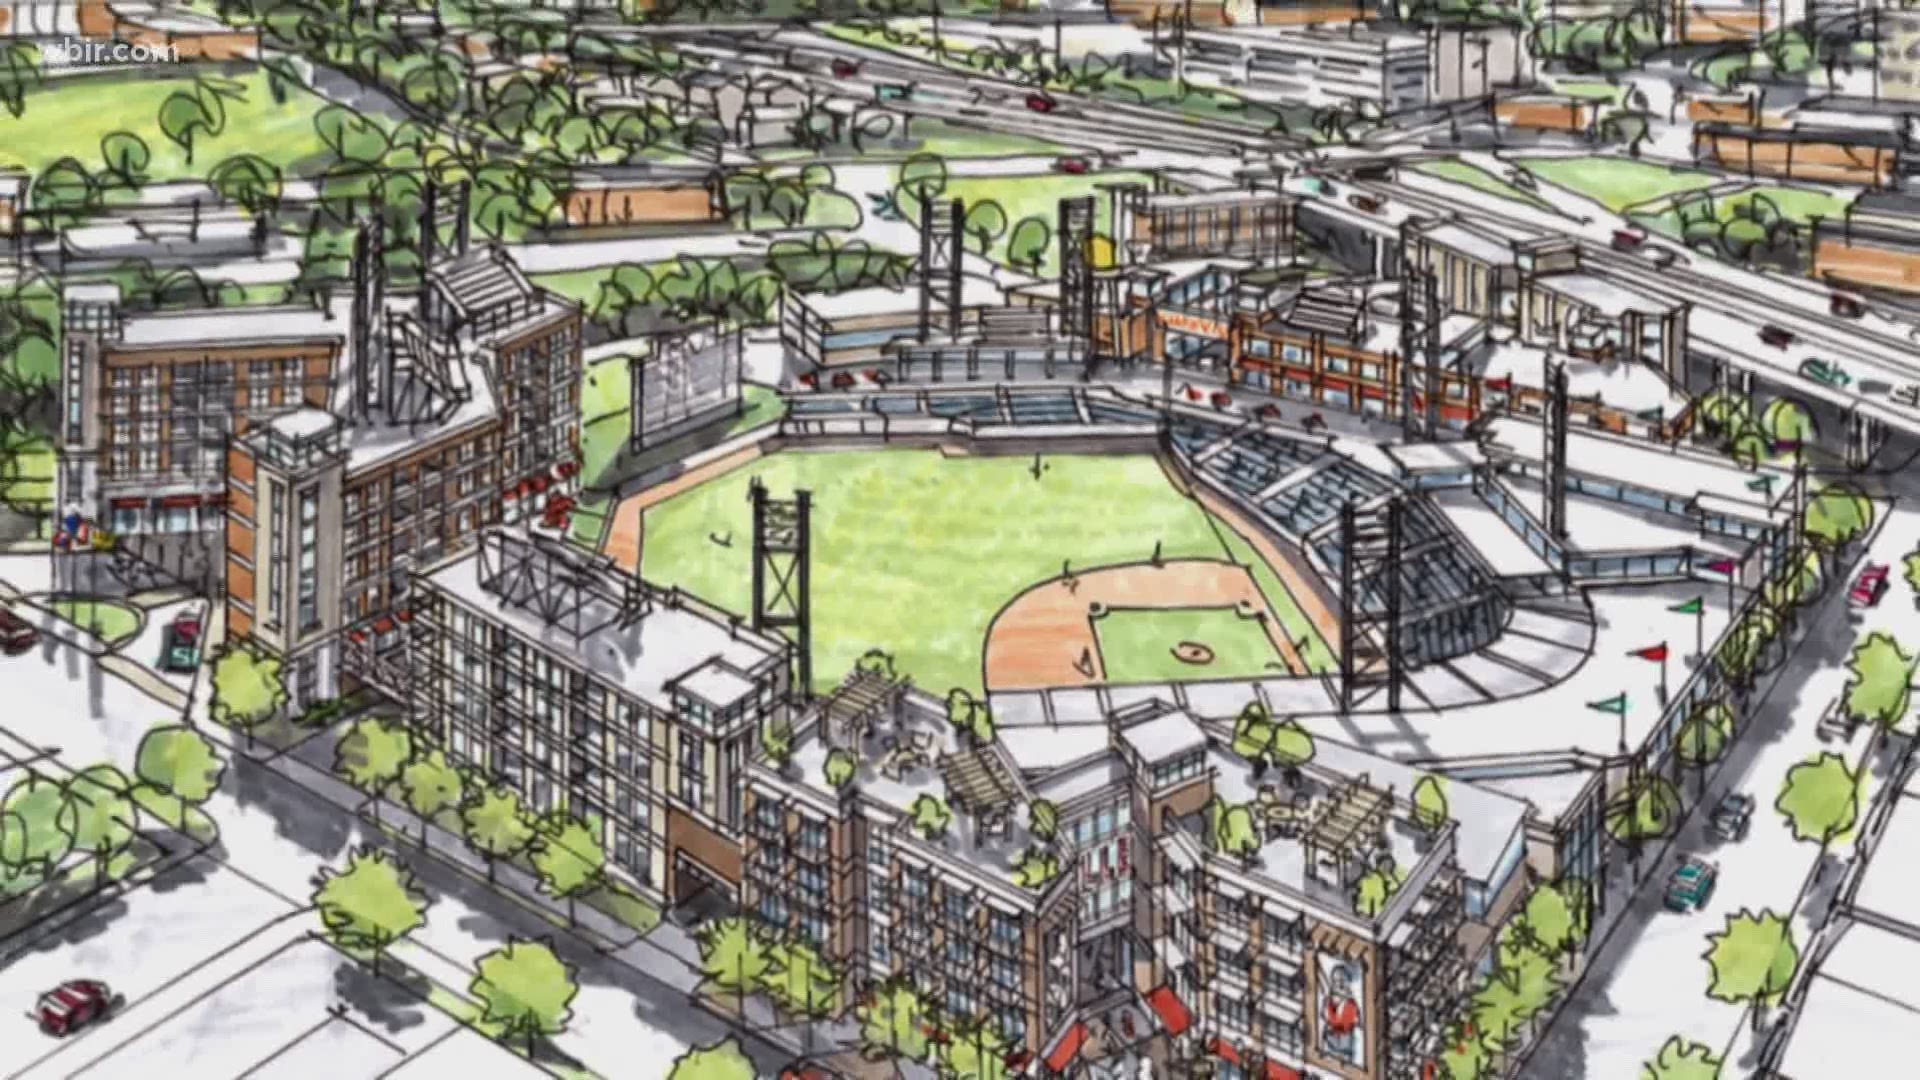 The mayor says if the plan is accepted and a new baseball stadium is funded, it will likely serve more than just baseball in Knoxville's Old City.